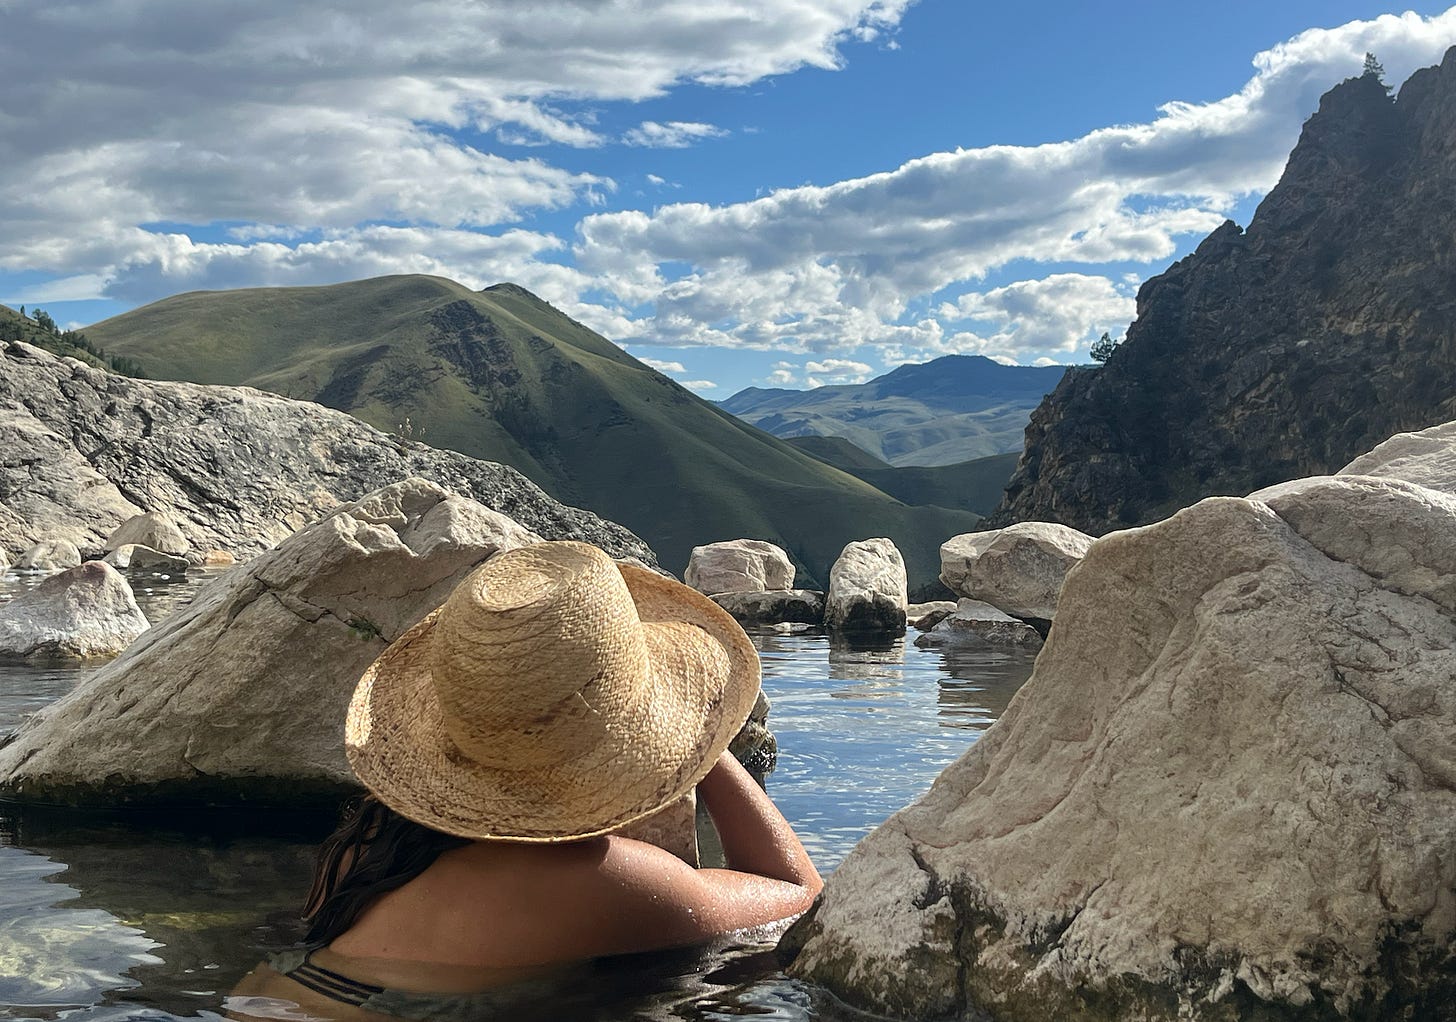 Person wearing sunhat soaking in hot spring looking in canyon.